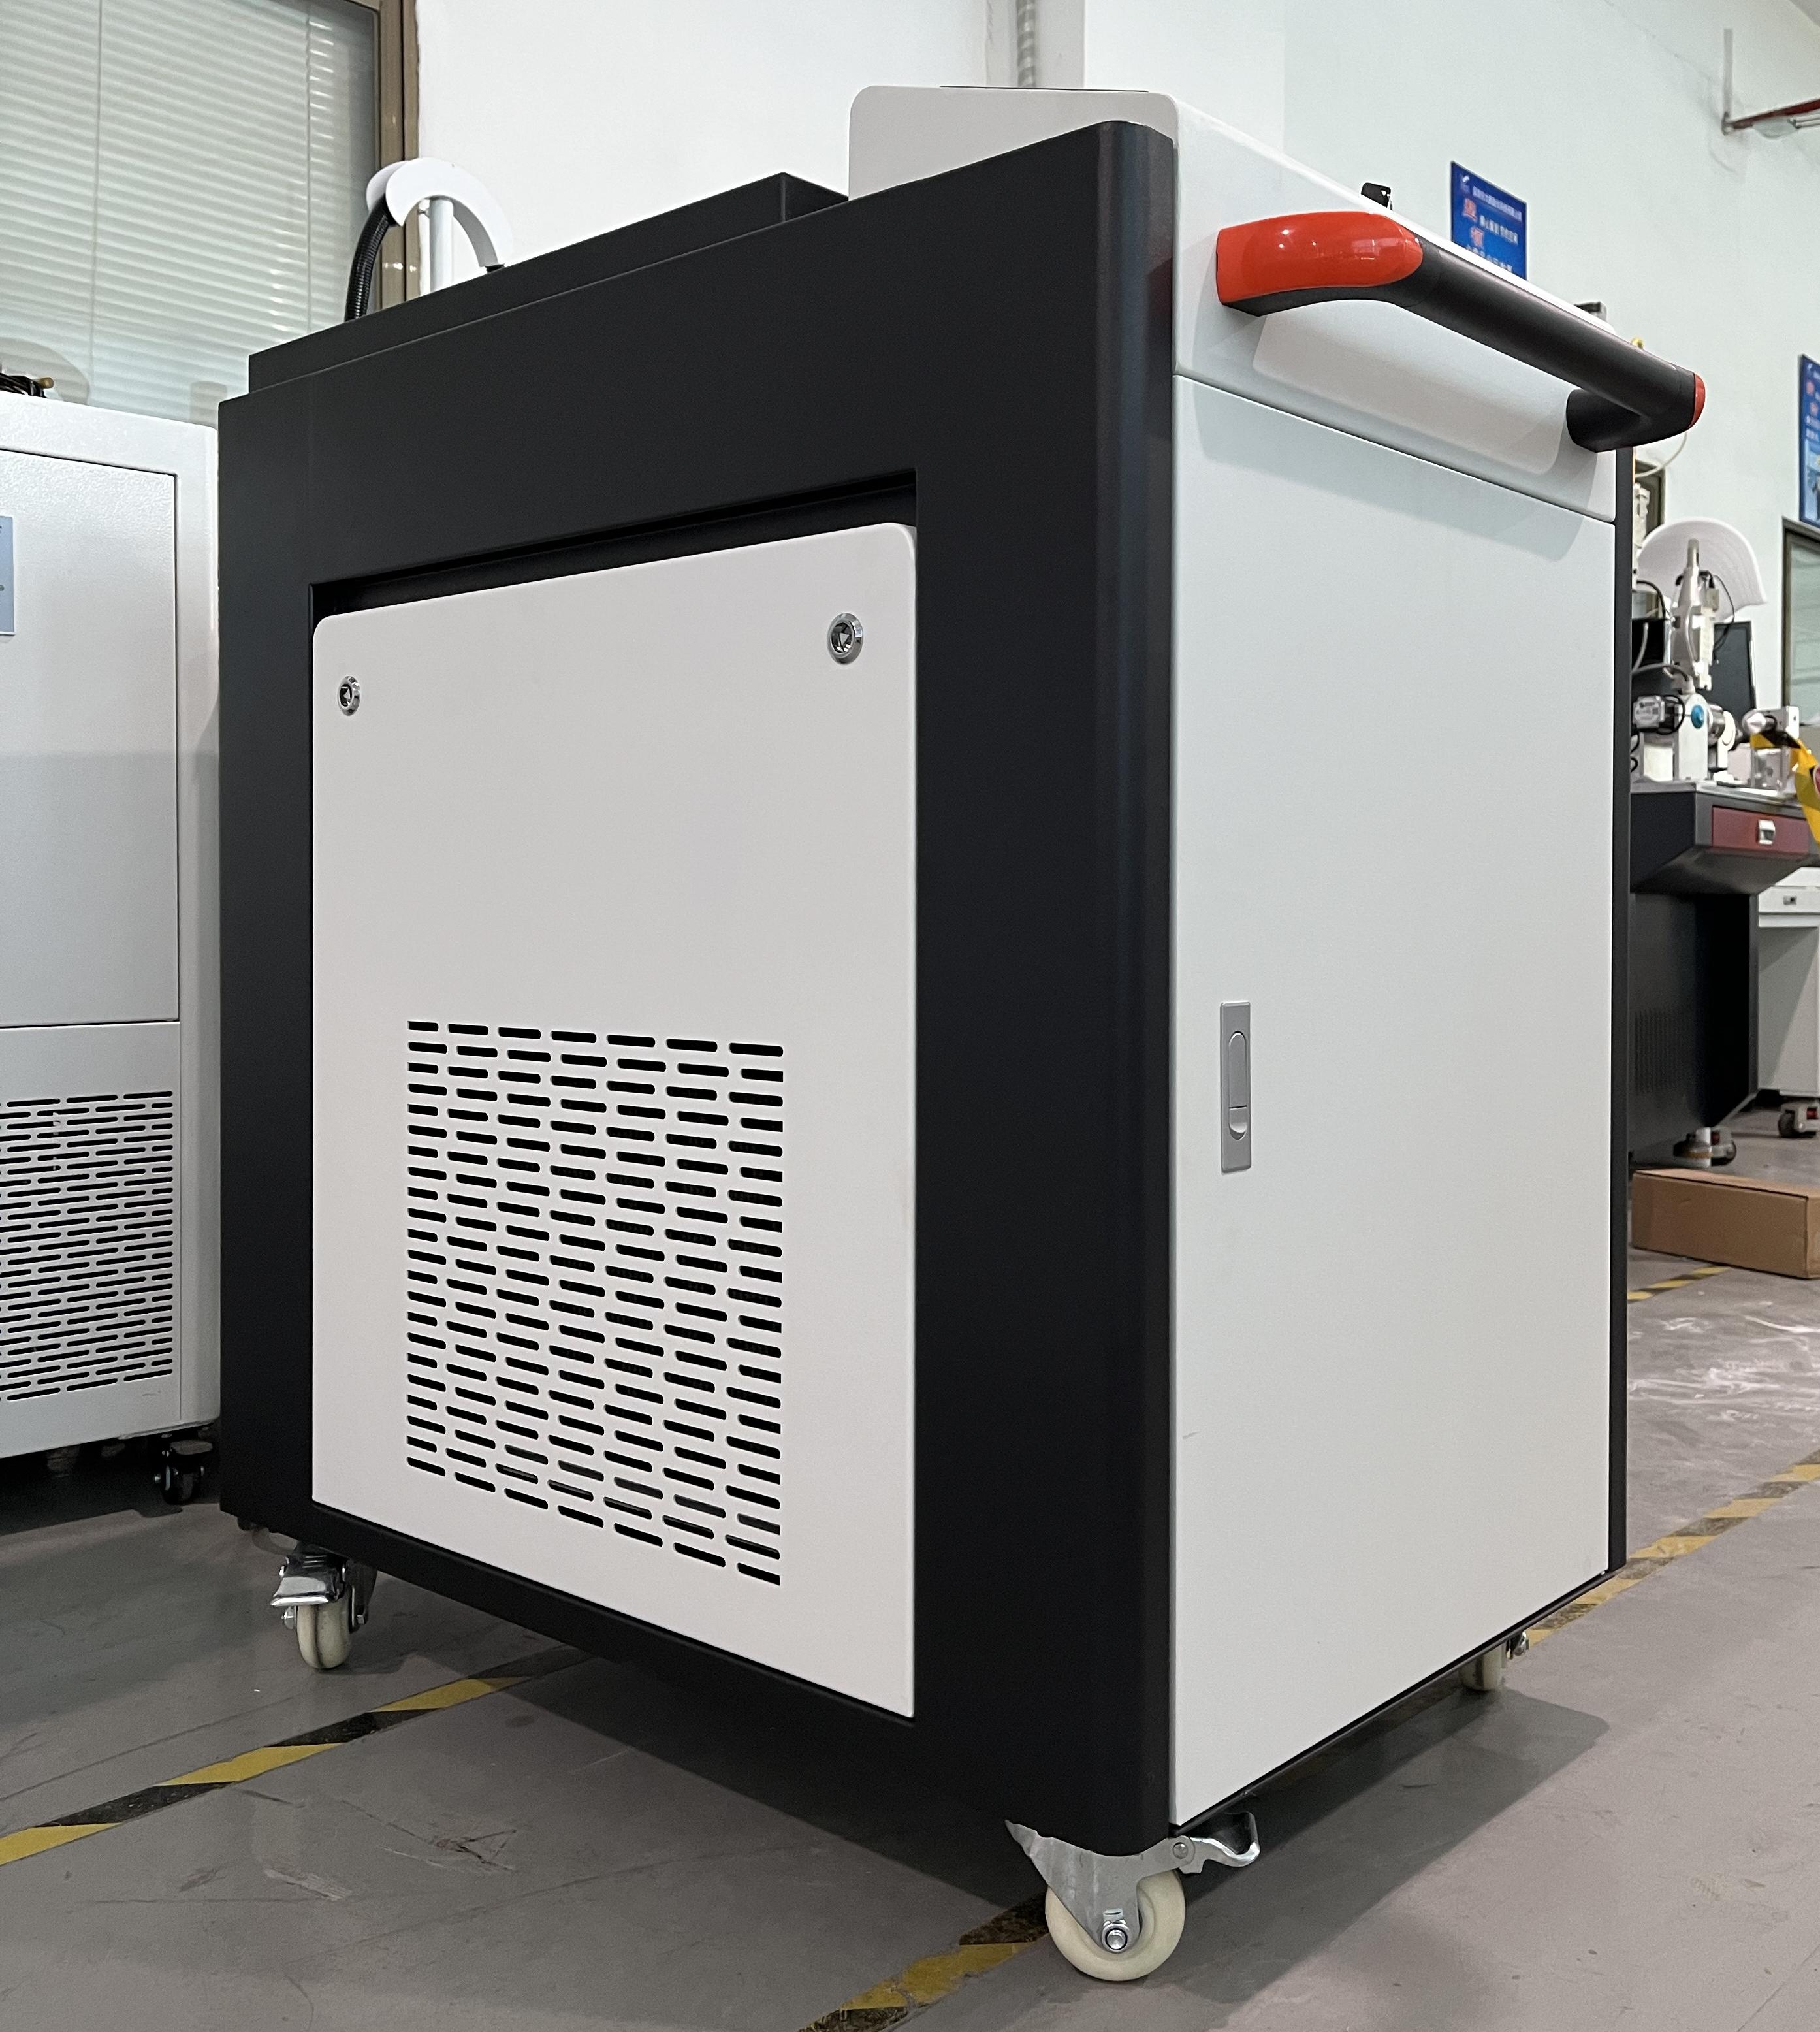 Laser 1000w fiber laser welding machine for 1mm stainless steel and carbon steel weld